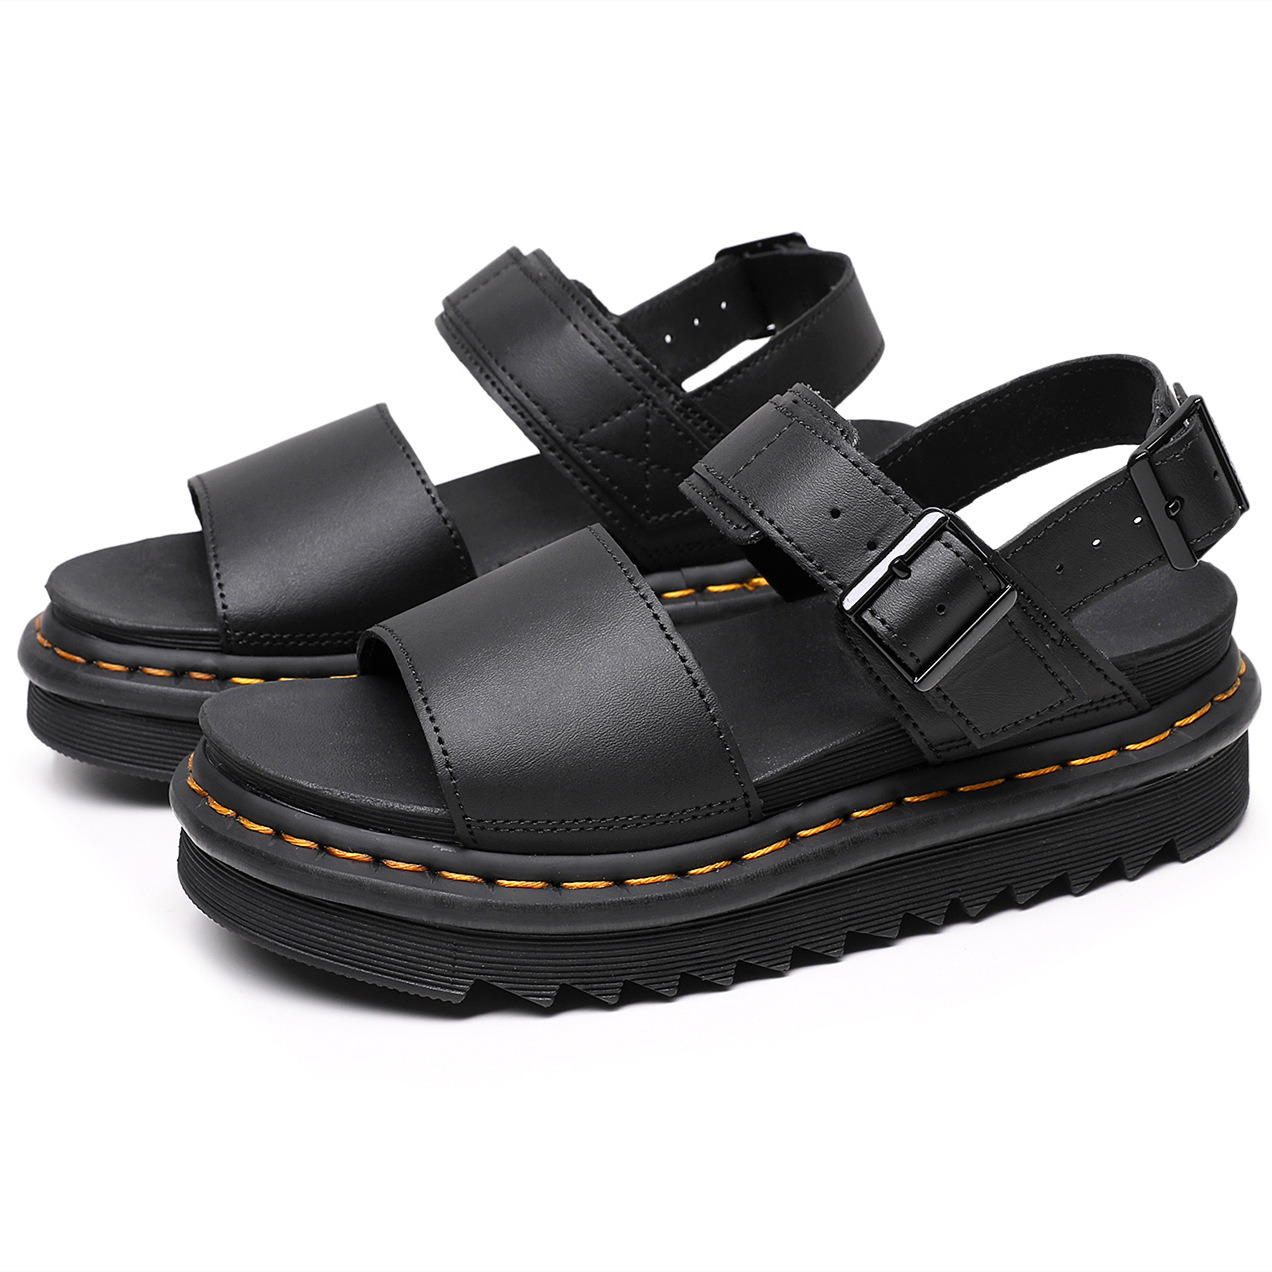 Comfortable High Quality Lightweight Fashion Casual Shoes Leather Sandal